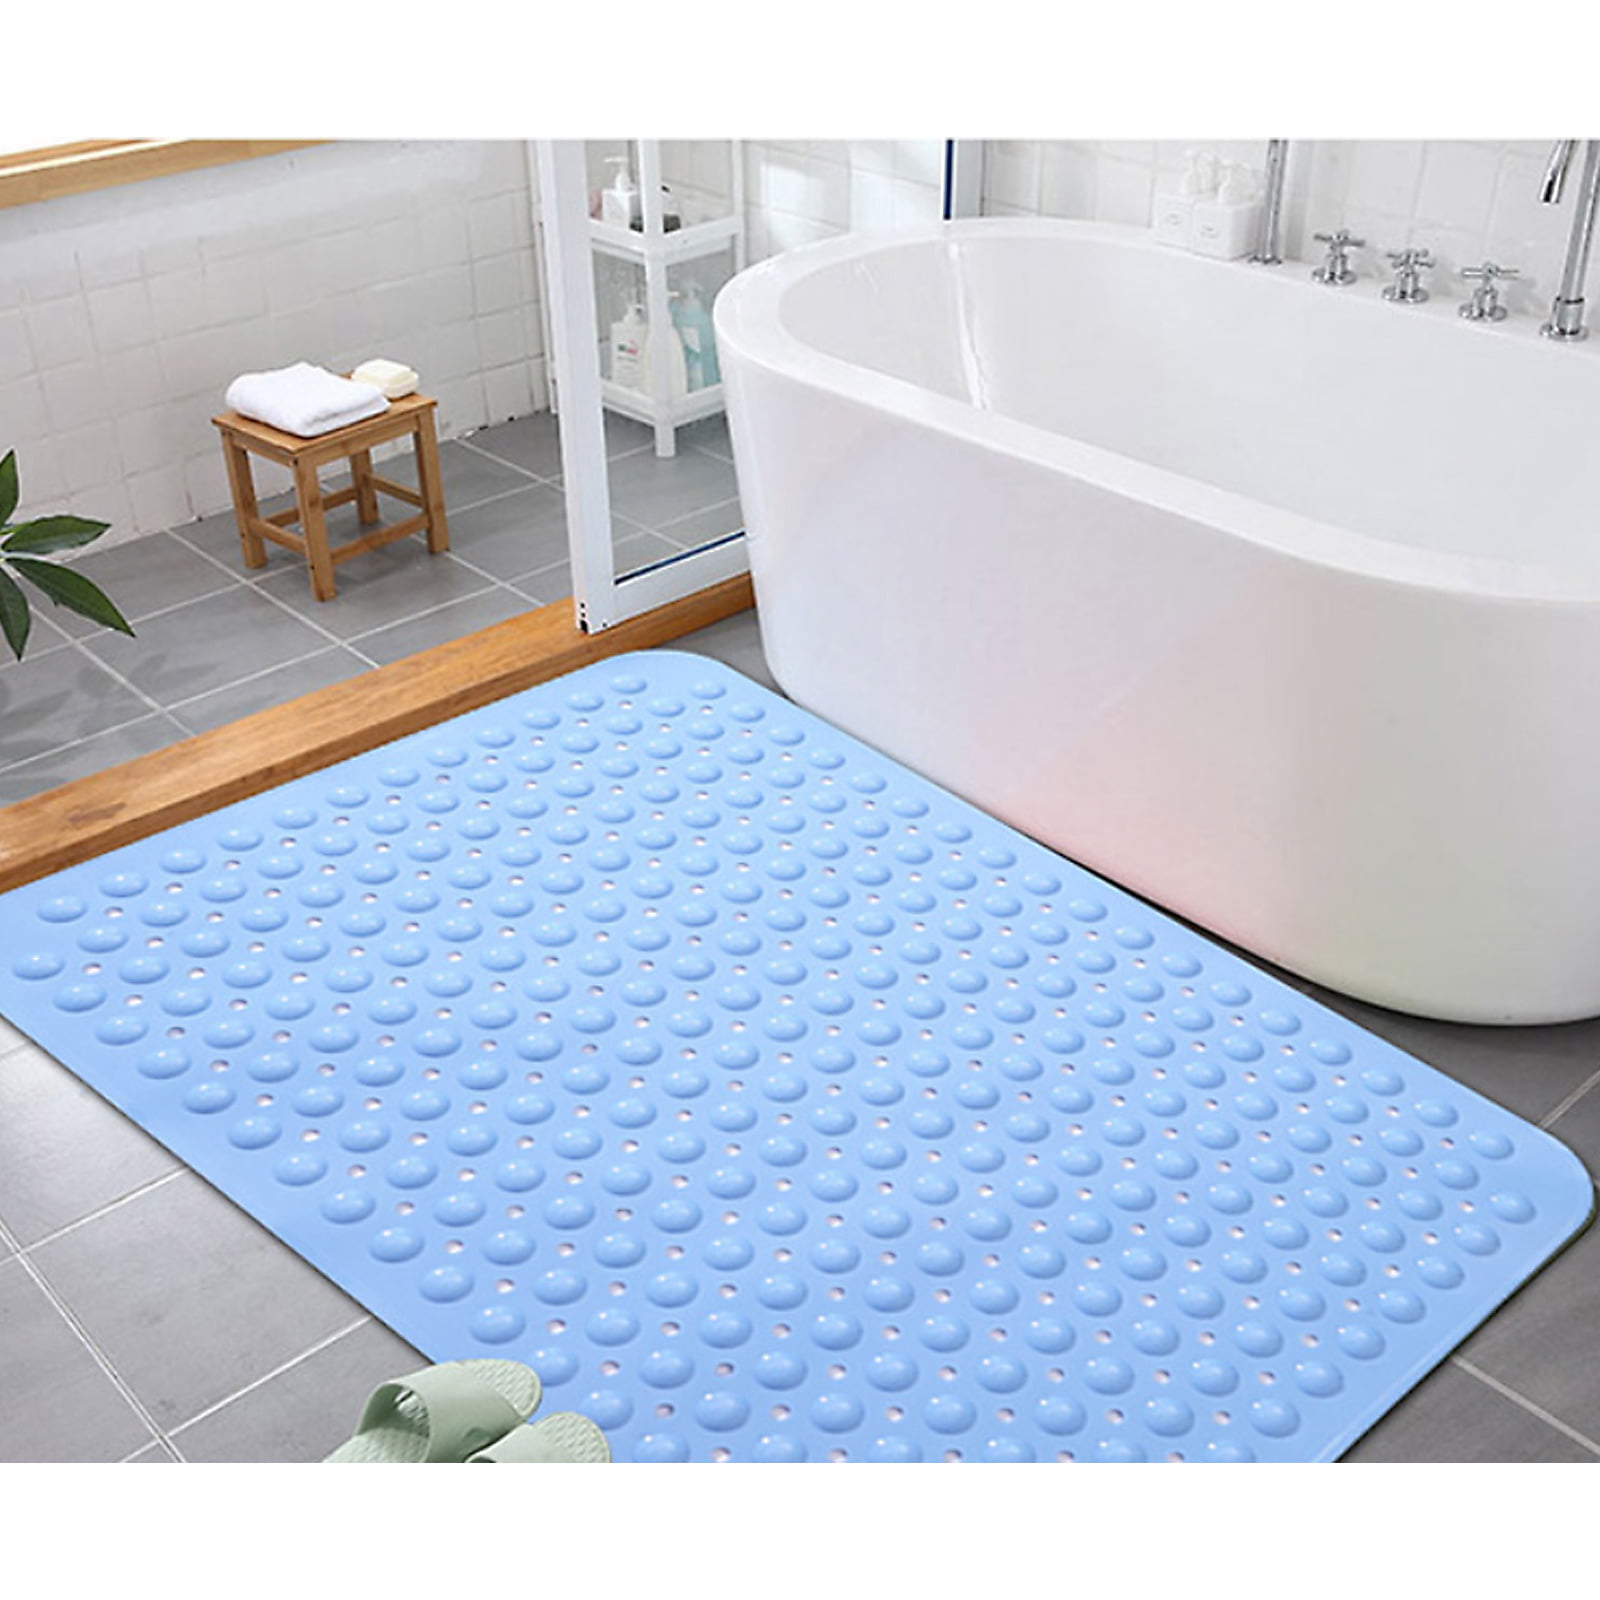 NemoHome RNAB0B5PQK7DH nemohome humidifier mat waterproof tray carpet floor  protective non slip catch spills raised silicone edge and washable from